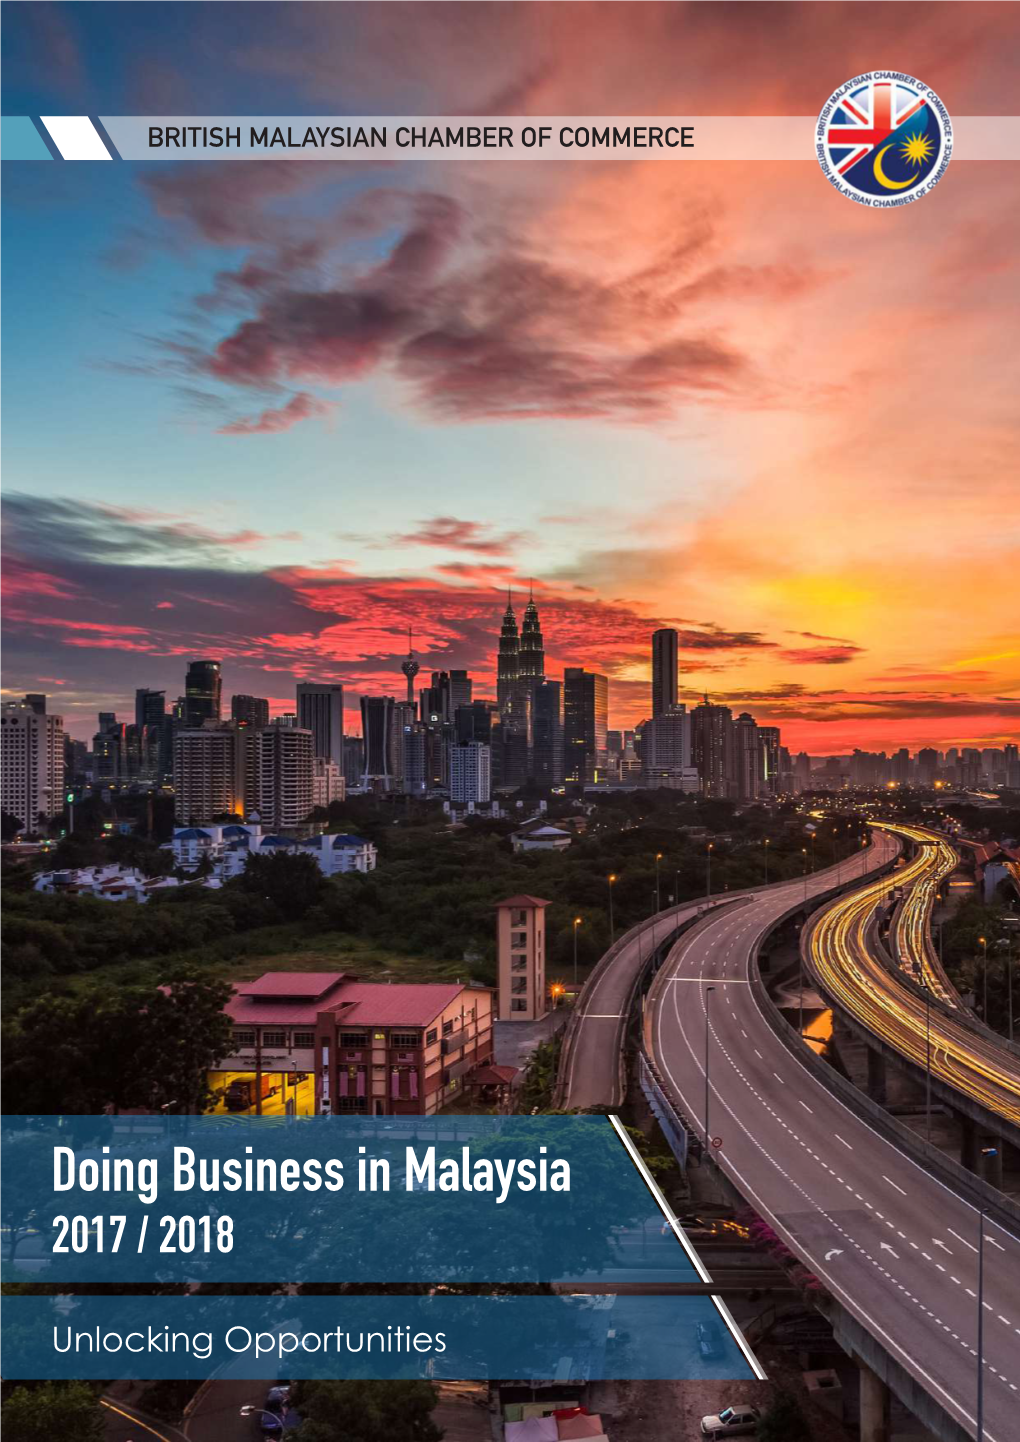 Doing Business in Malaysia 2017 / 2018